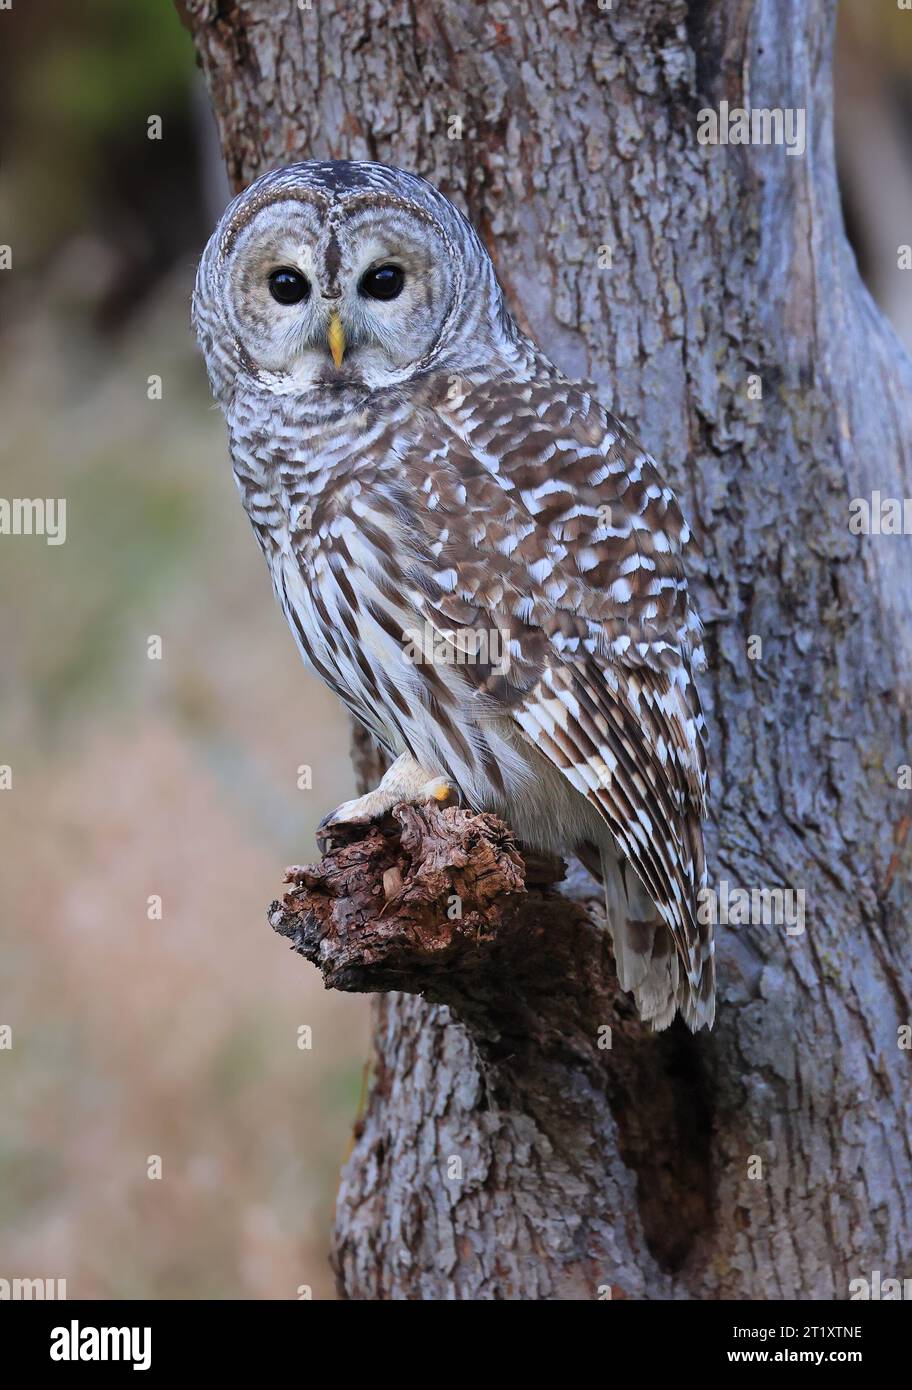 Barred Owl standing on a tree branch in the forest at sunset with green and orange background, Quebec, Canada Stock Photo